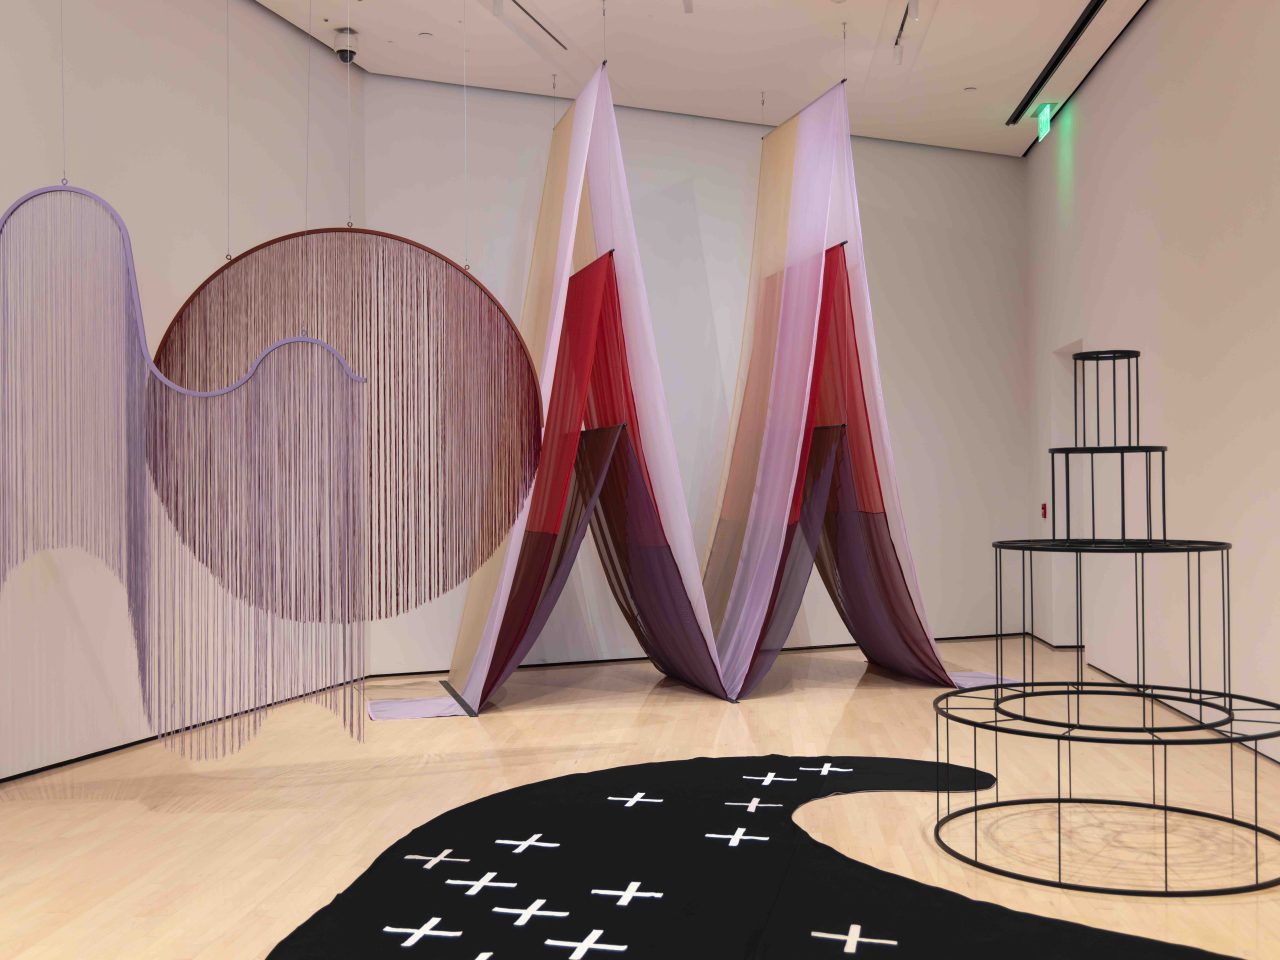 Andrea Canepa: As we dwell in the fold installation view